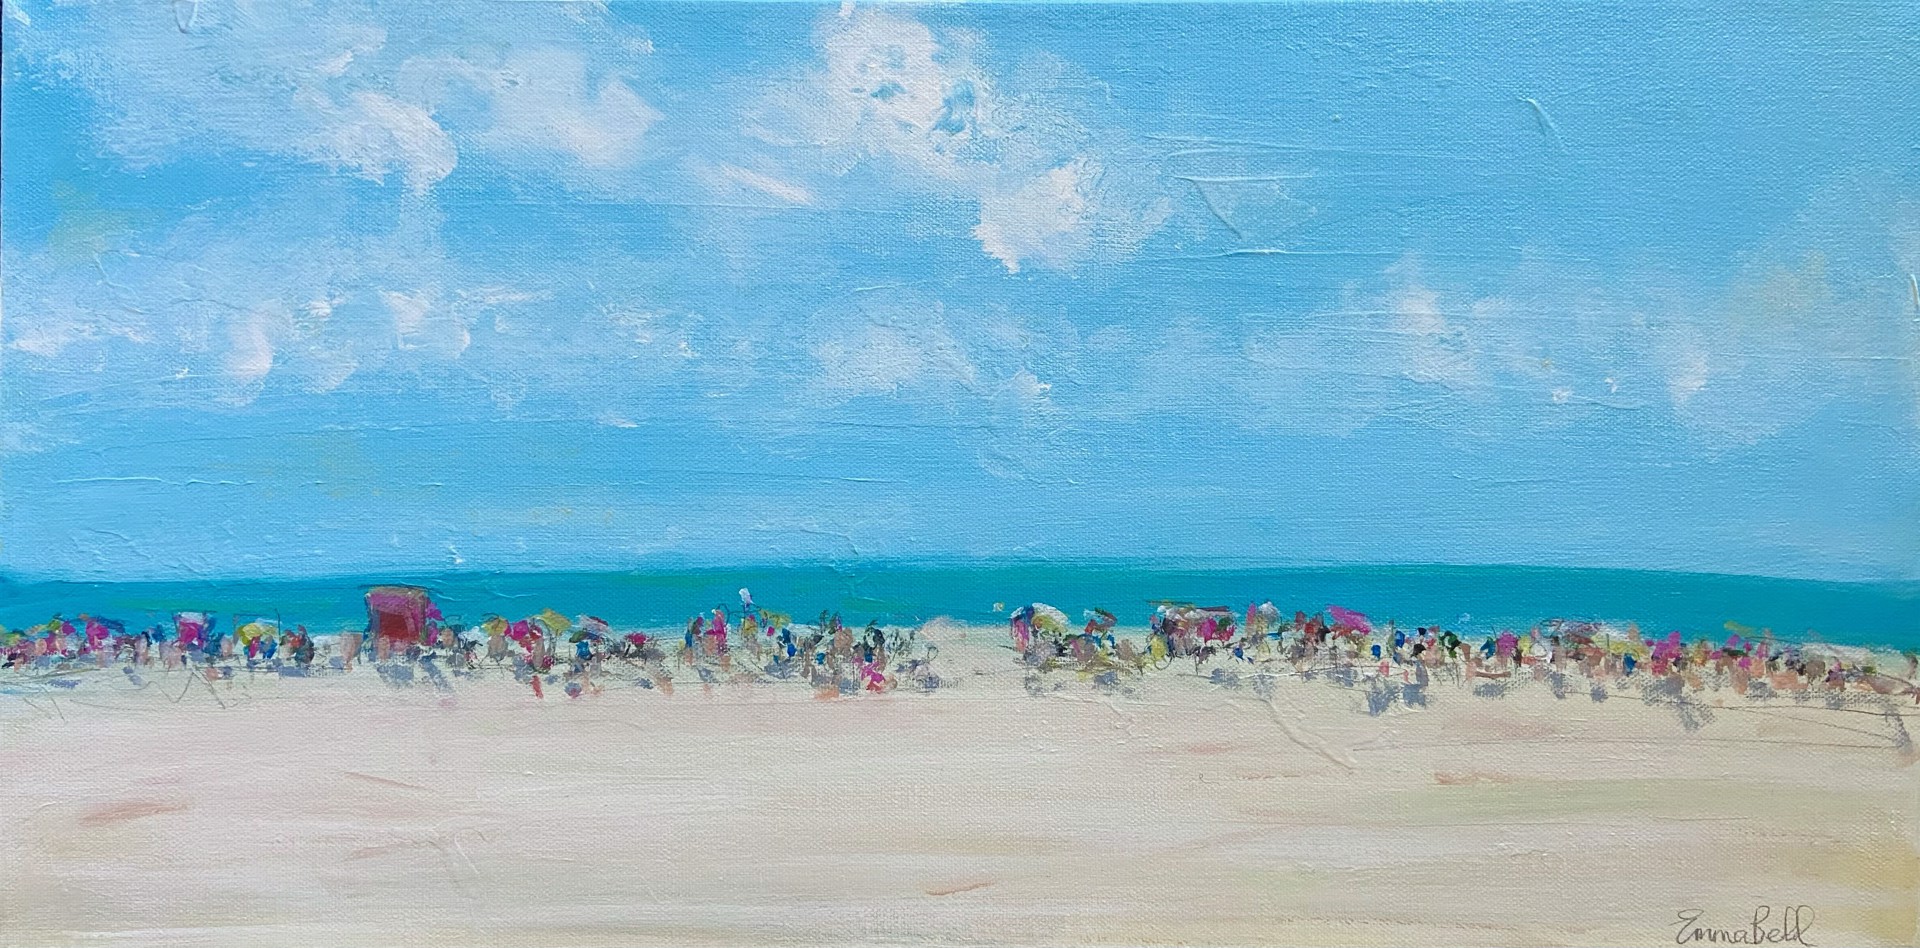 A Busy Day at the Beach by Emma Bell